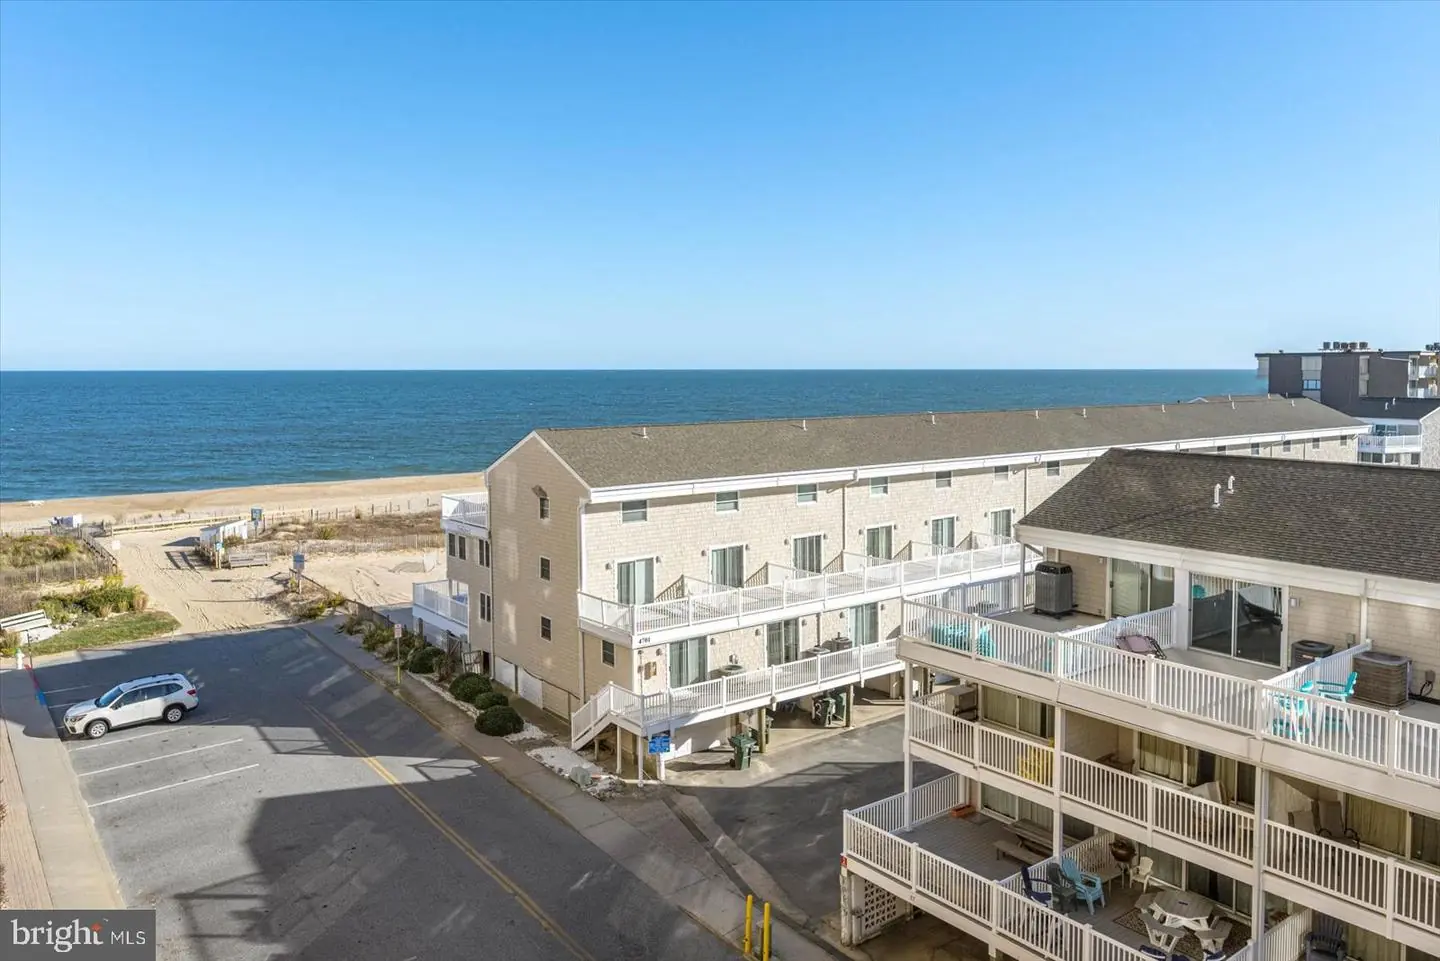 MDWO2017306-802698897042-2023-10-27-09-59-03 2 48th St #402 | Ocean City, MD Real Estate For Sale | MLS# Mdwo2017306  - 1st Choice Properties